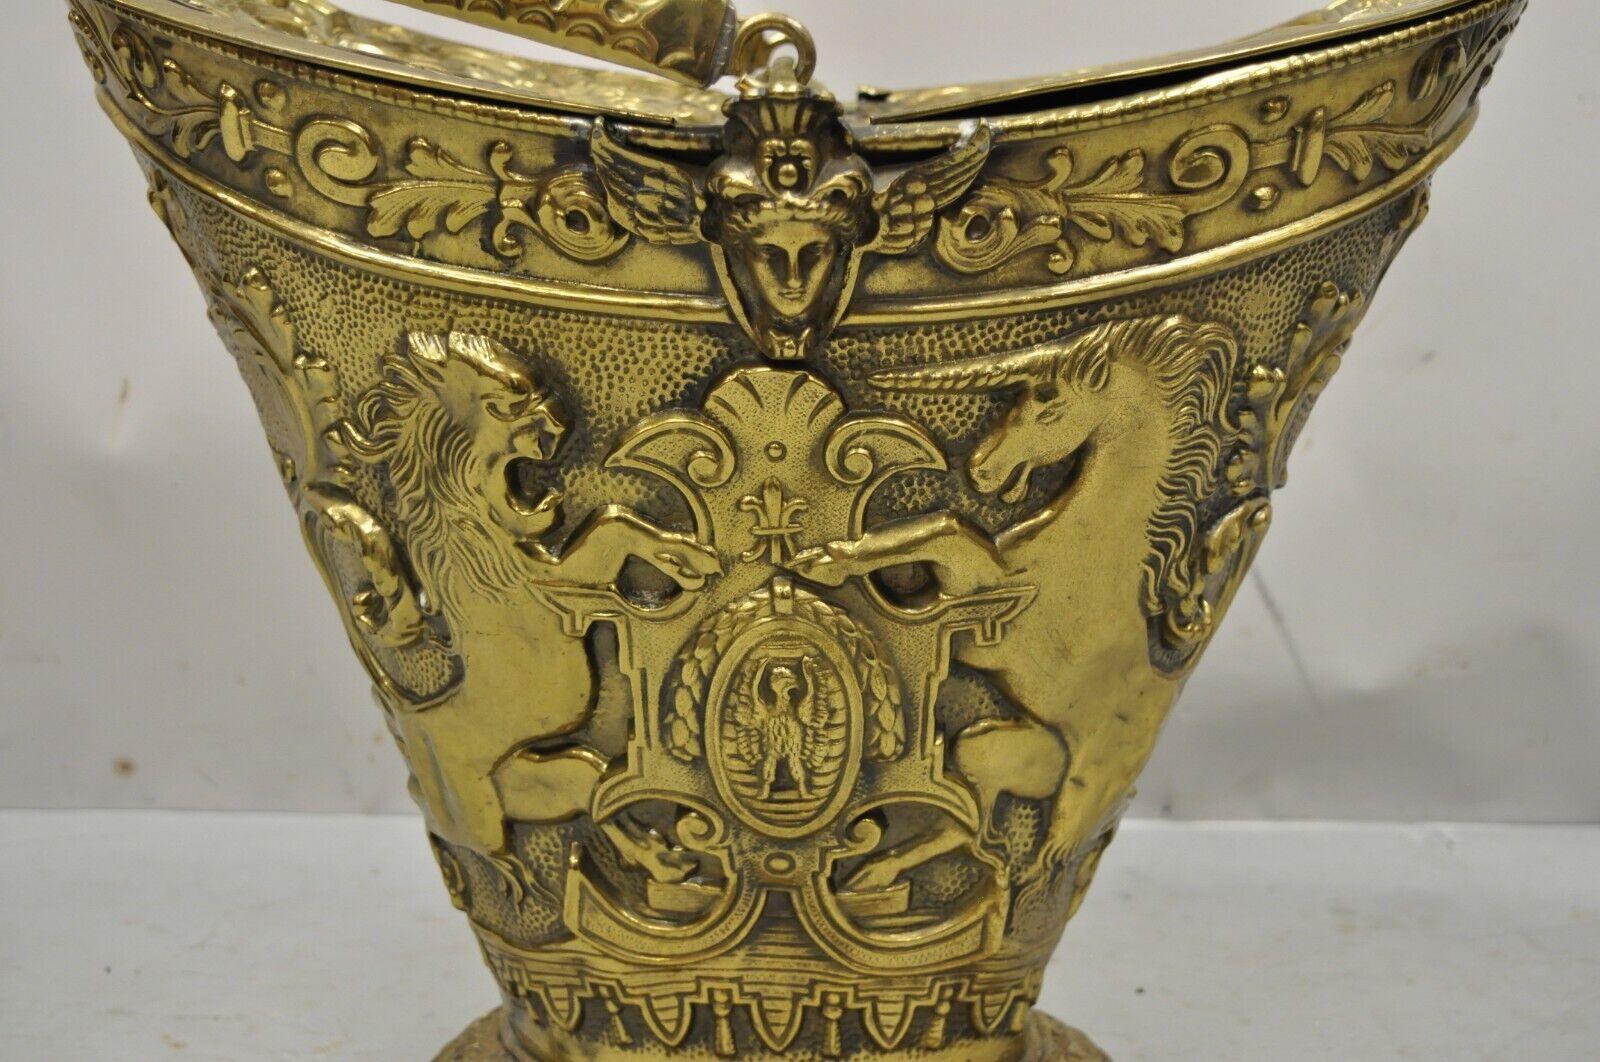 Antique English Renaissance Unicorn, lion shield figural brass coal bucket bin. Item features ornate debossed brass form with lions, unicorn, shield, winged maidens, and fancy scroll work, double lift sides and handle, quality English craftsmanship,